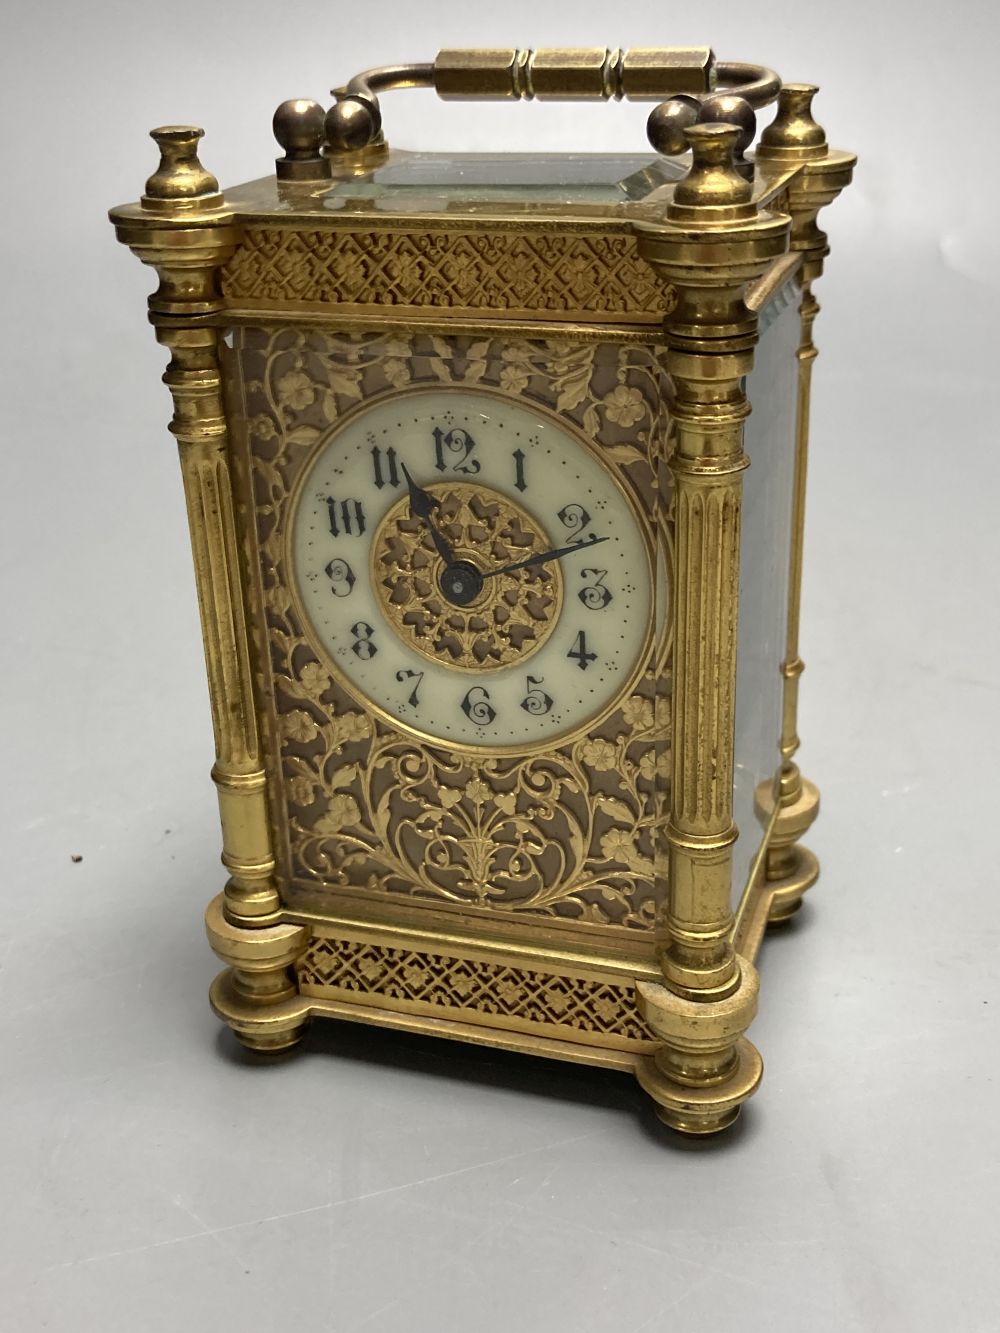 A brass timepiece with four glass panels and filigree decoration